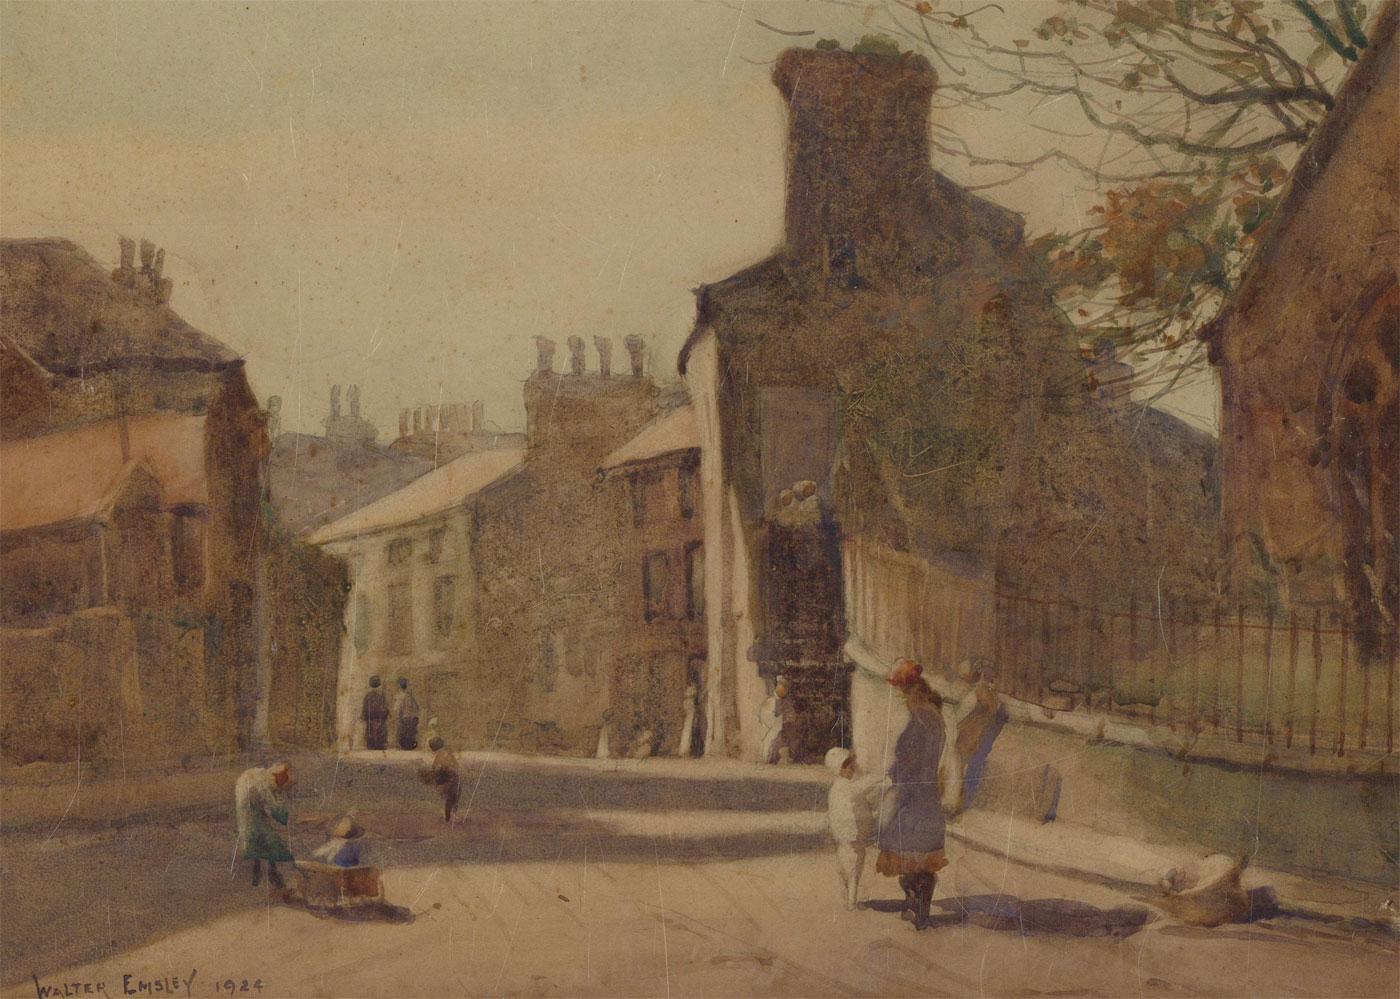 A very fine watercolour study by the listed British artist Walter Emsley (1860-1938). The artist has captured children playing in a street of terraced houses with a small church on the corner. A young girl pulls her young sibling in a wooden cart